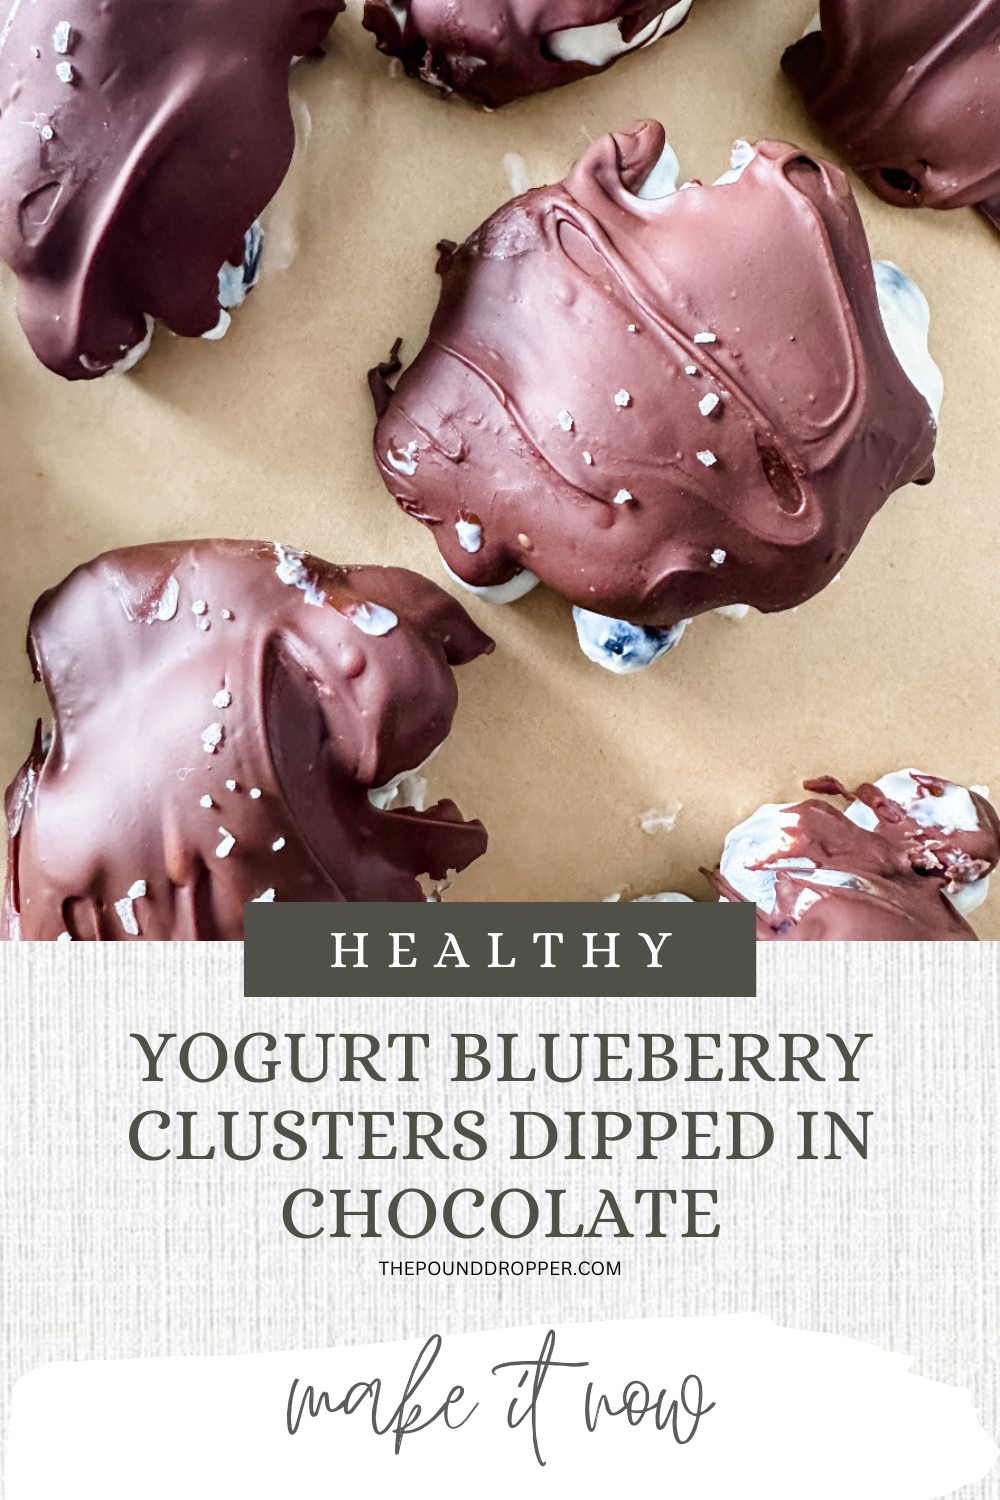 Yogurt Blueberry Clusters Dipped in Chocolate via @pounddropper